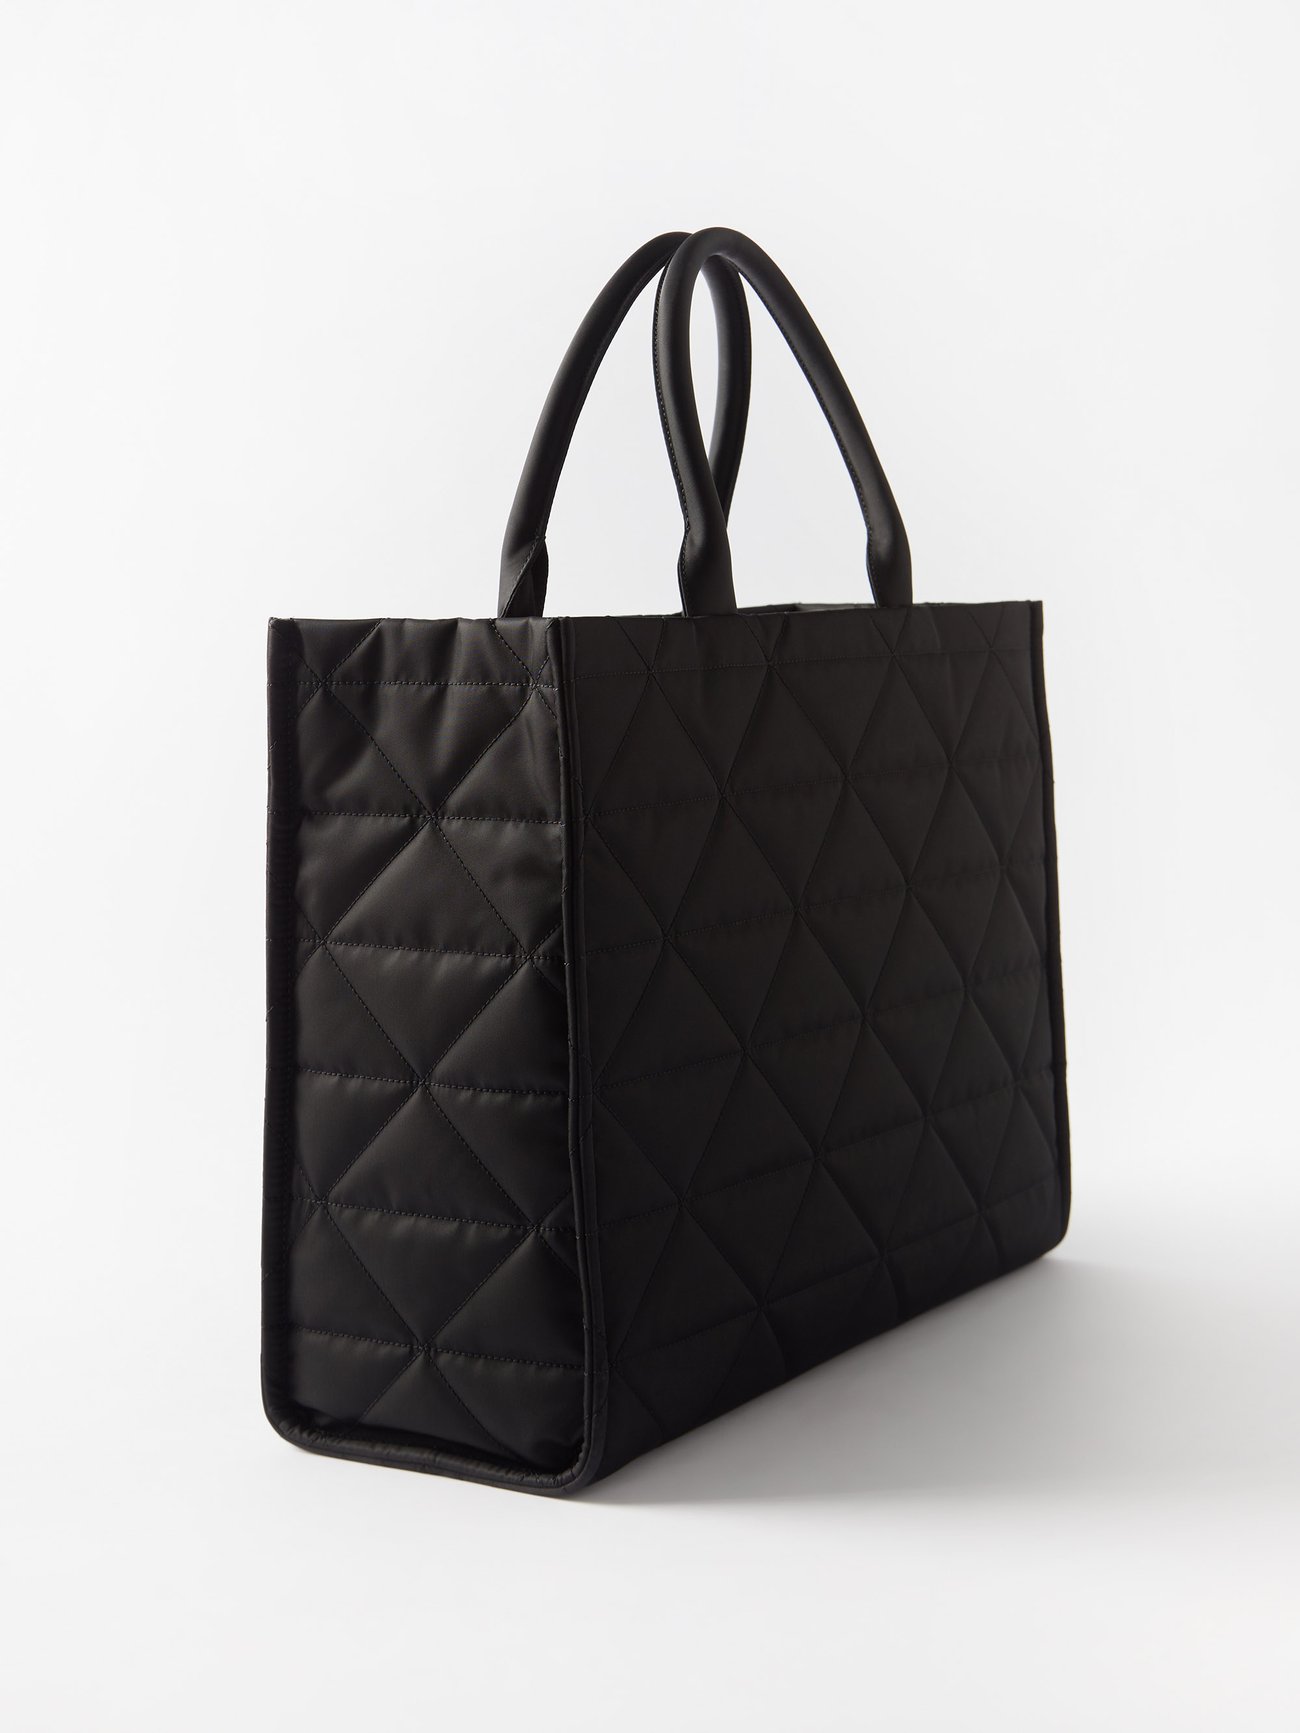 Re Nylon Quilted Tote in Black - Prada